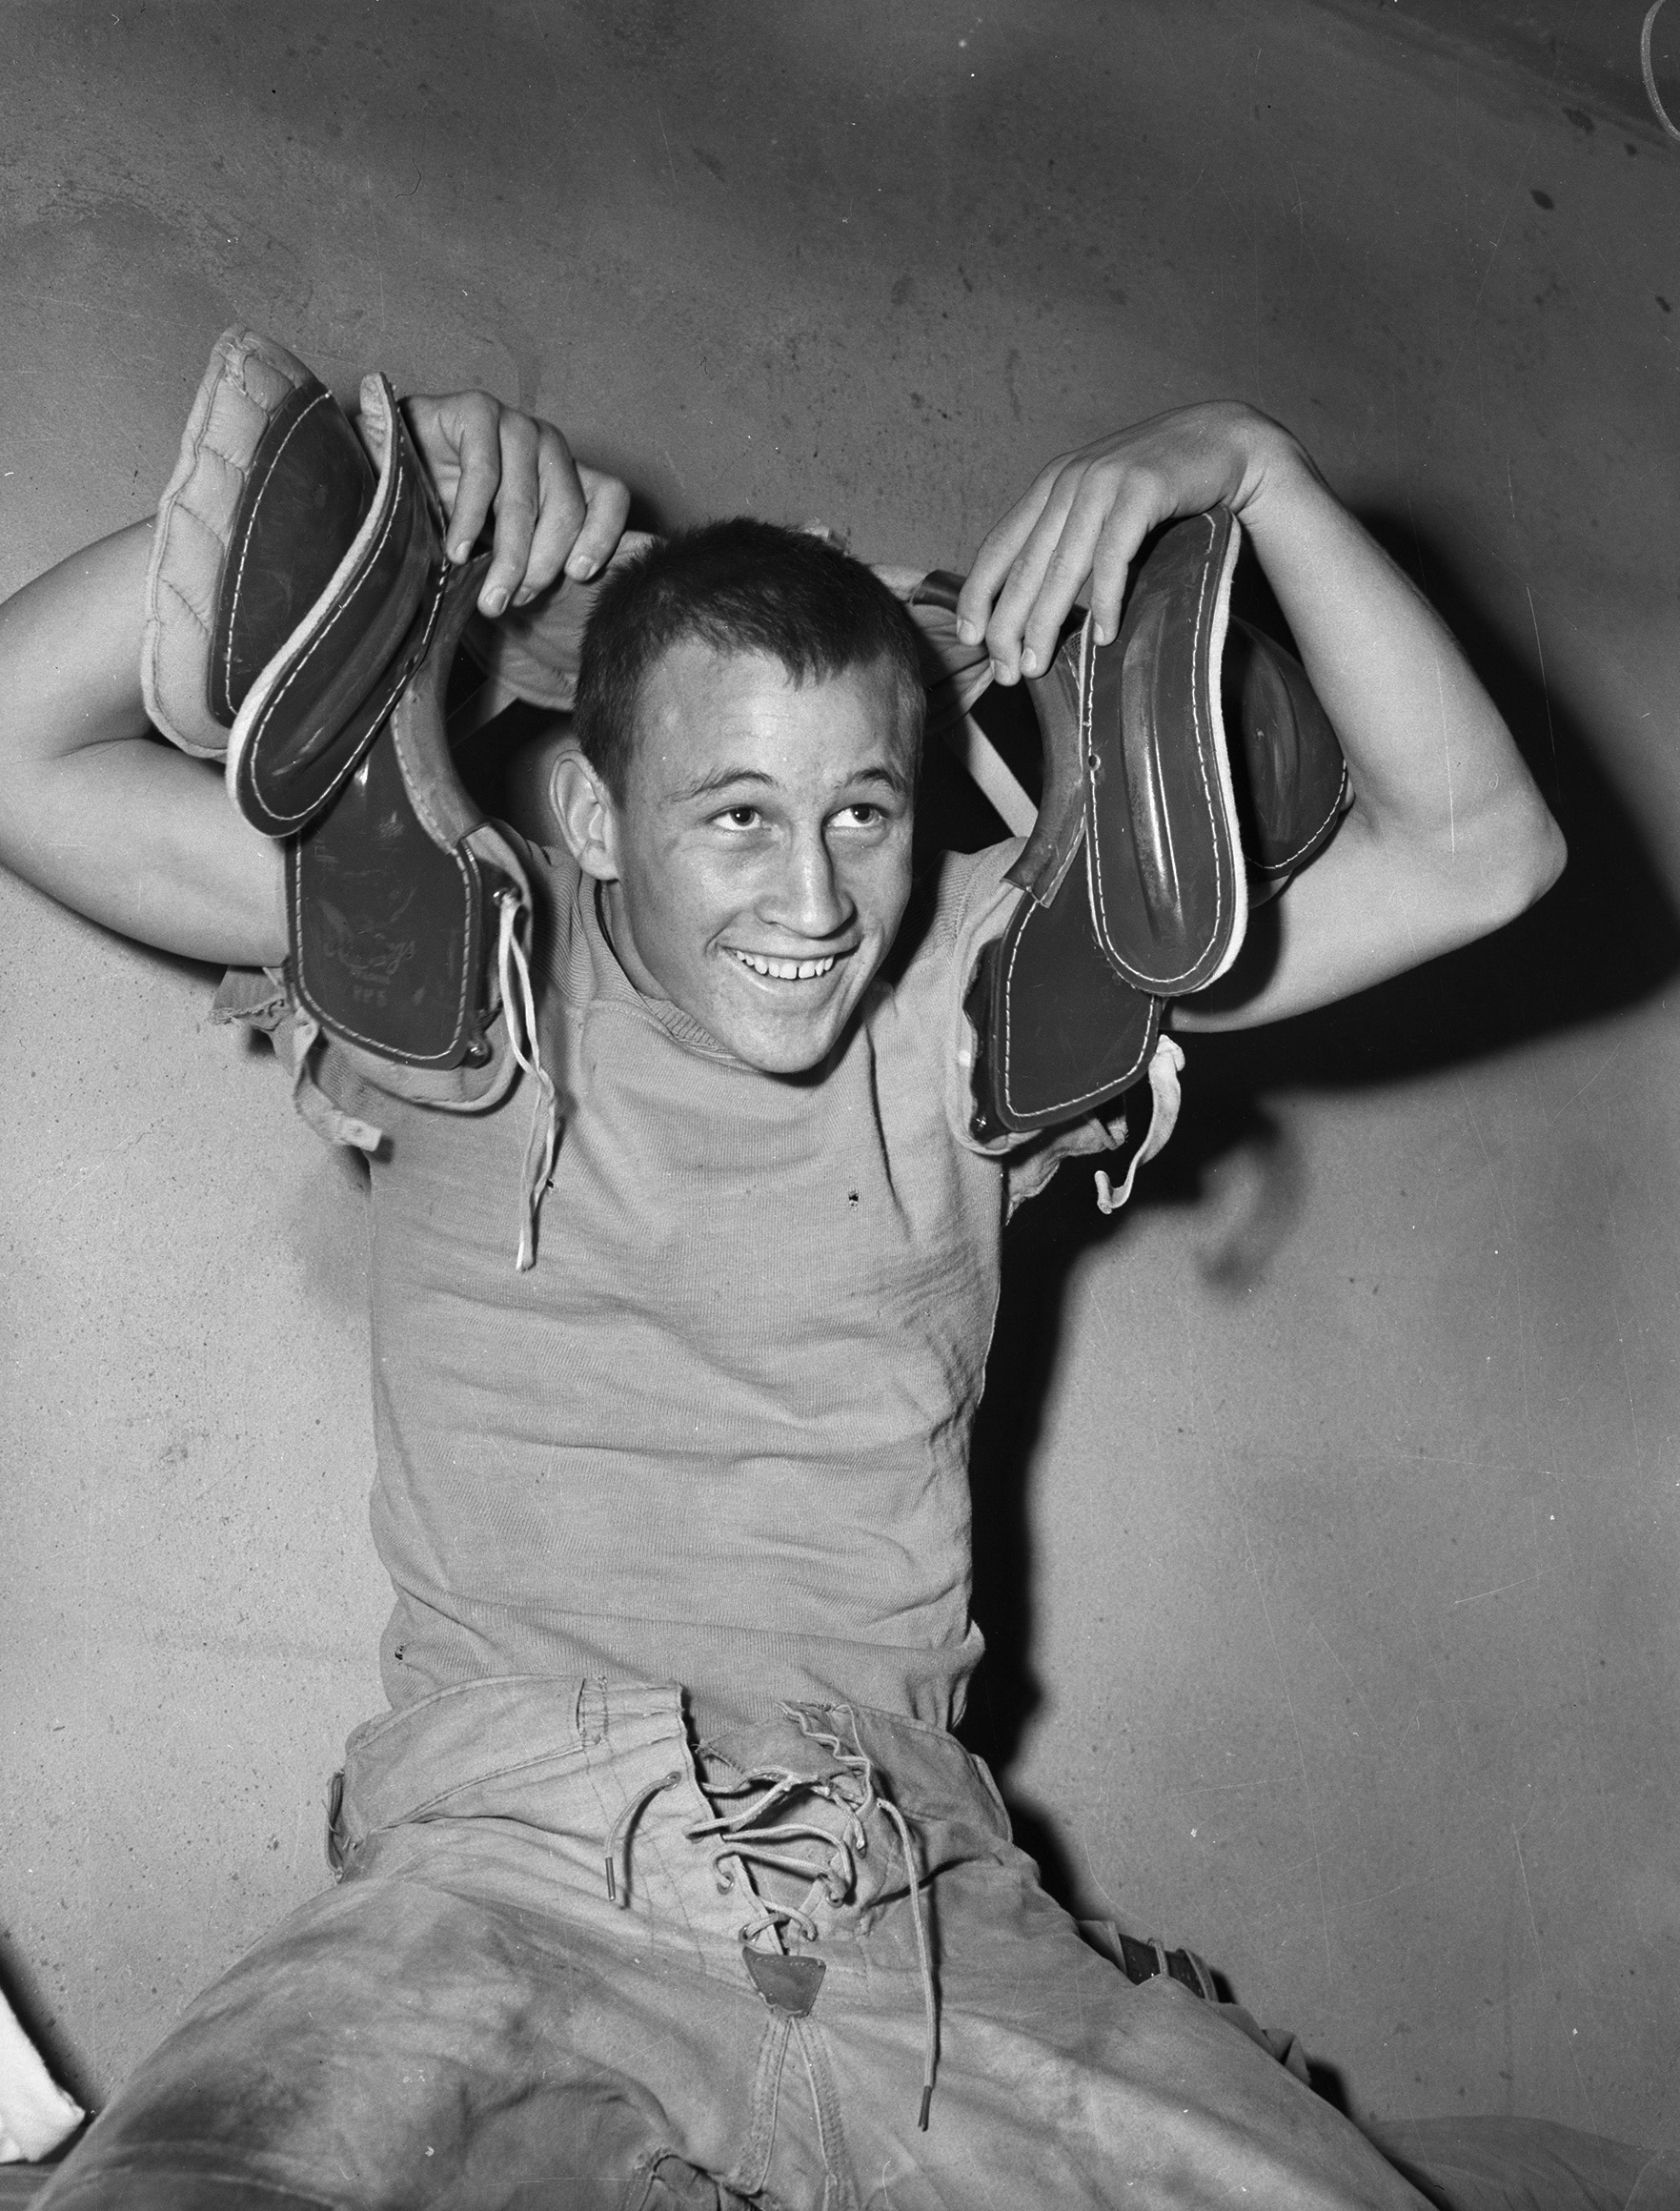 A young man is shown dressing in his pads and uniform in the locker room. He is wearing a t-shirt and canvas lace-up pants and holding his shoulder pads in place with a goofy grin on his face. They appear to be held in place with laces.